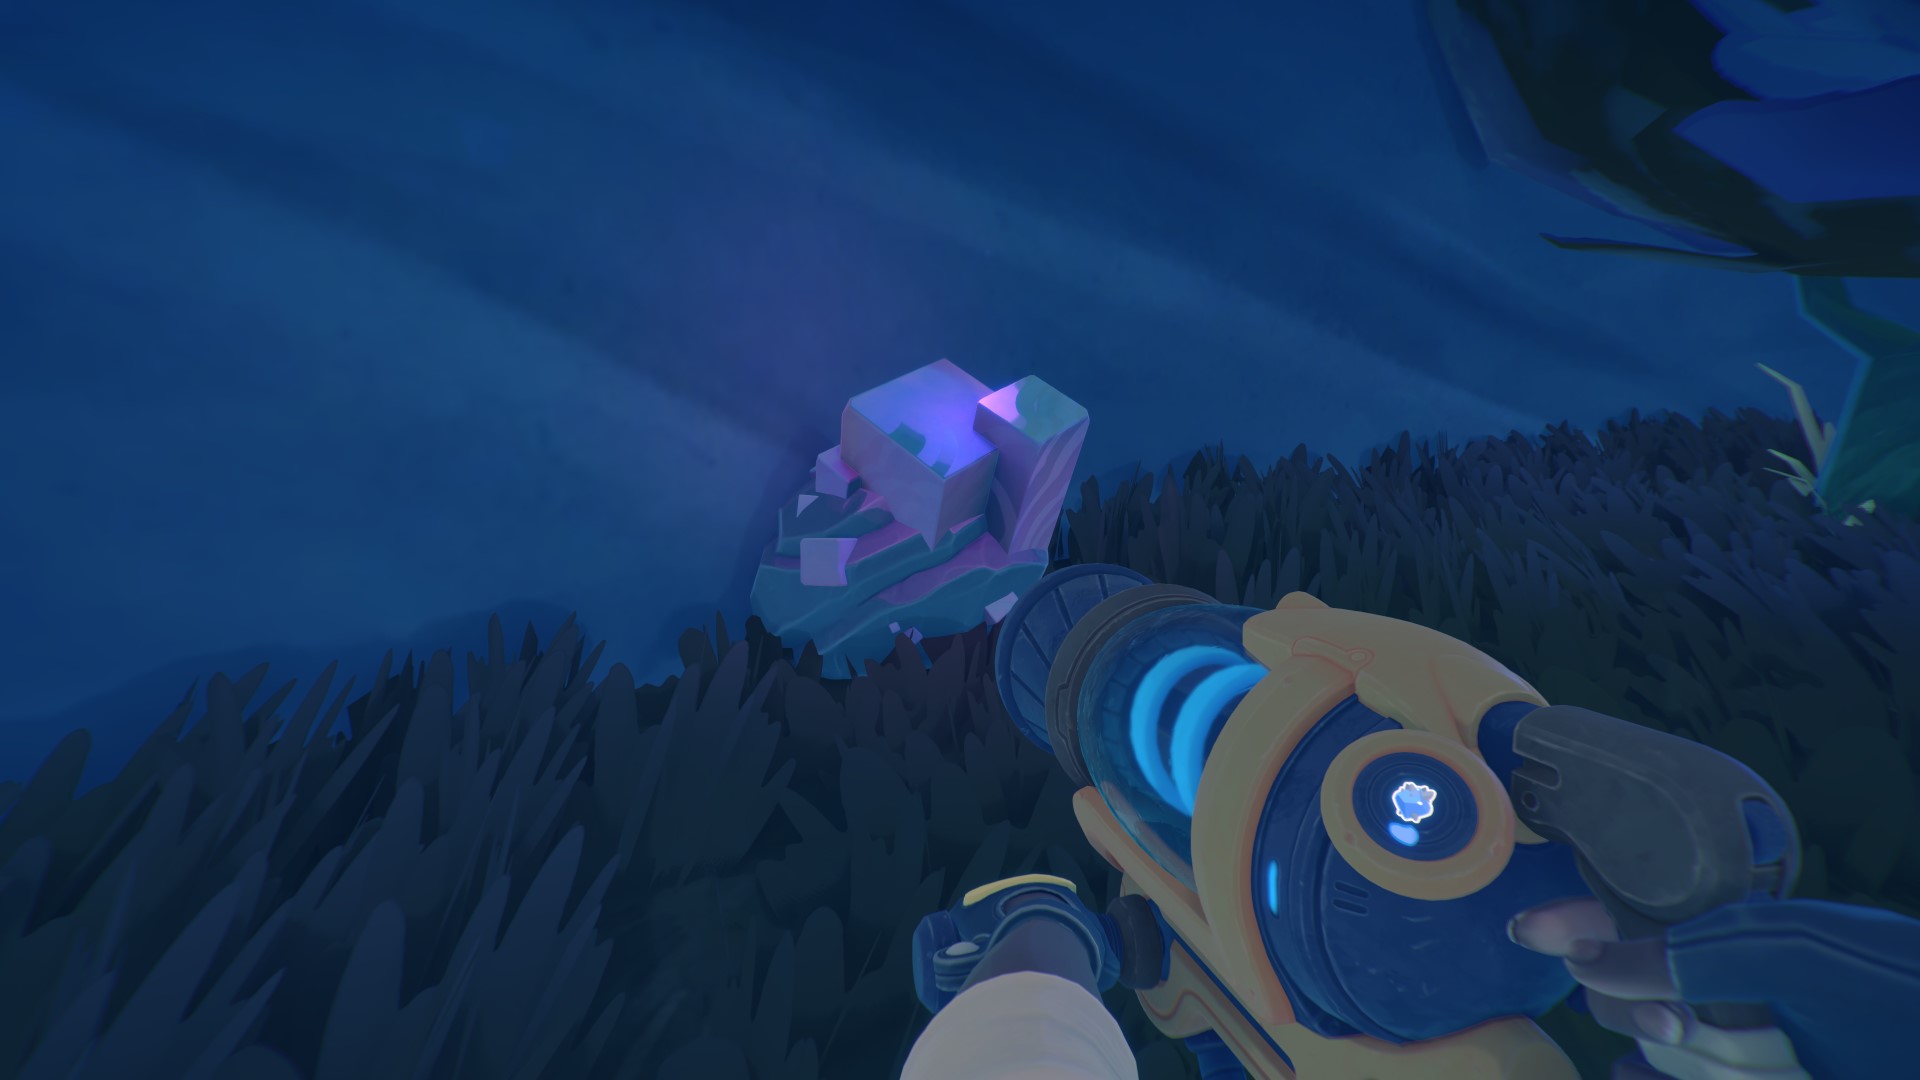 Slime Rancher 2 Starlight Strand - Map, nodes, slimes, and resource spots